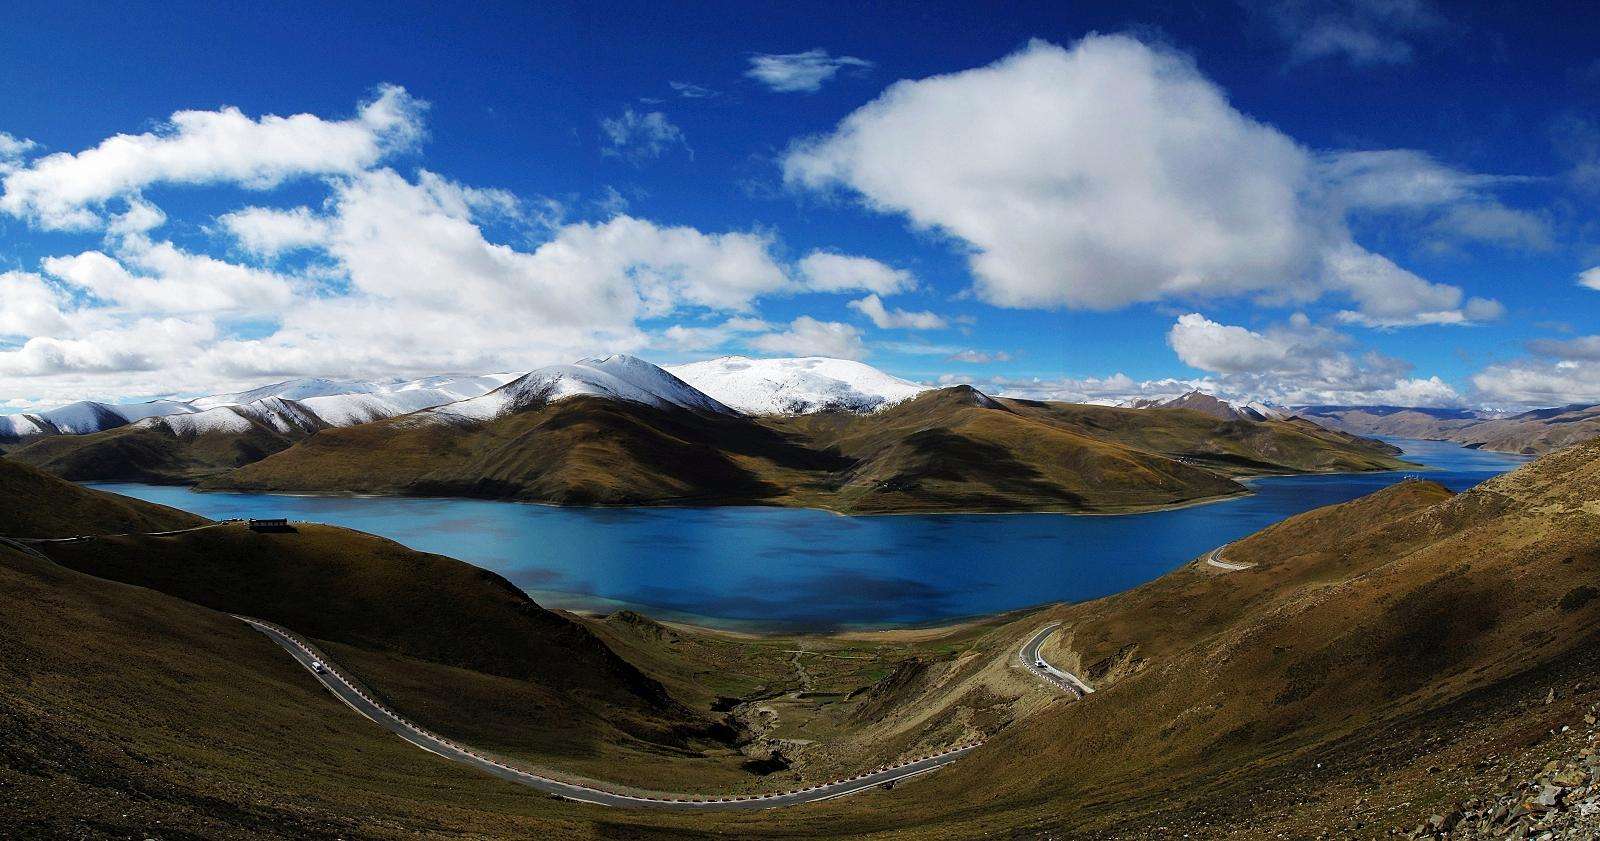 Tourism industry in Tibet thrusts local economic growth